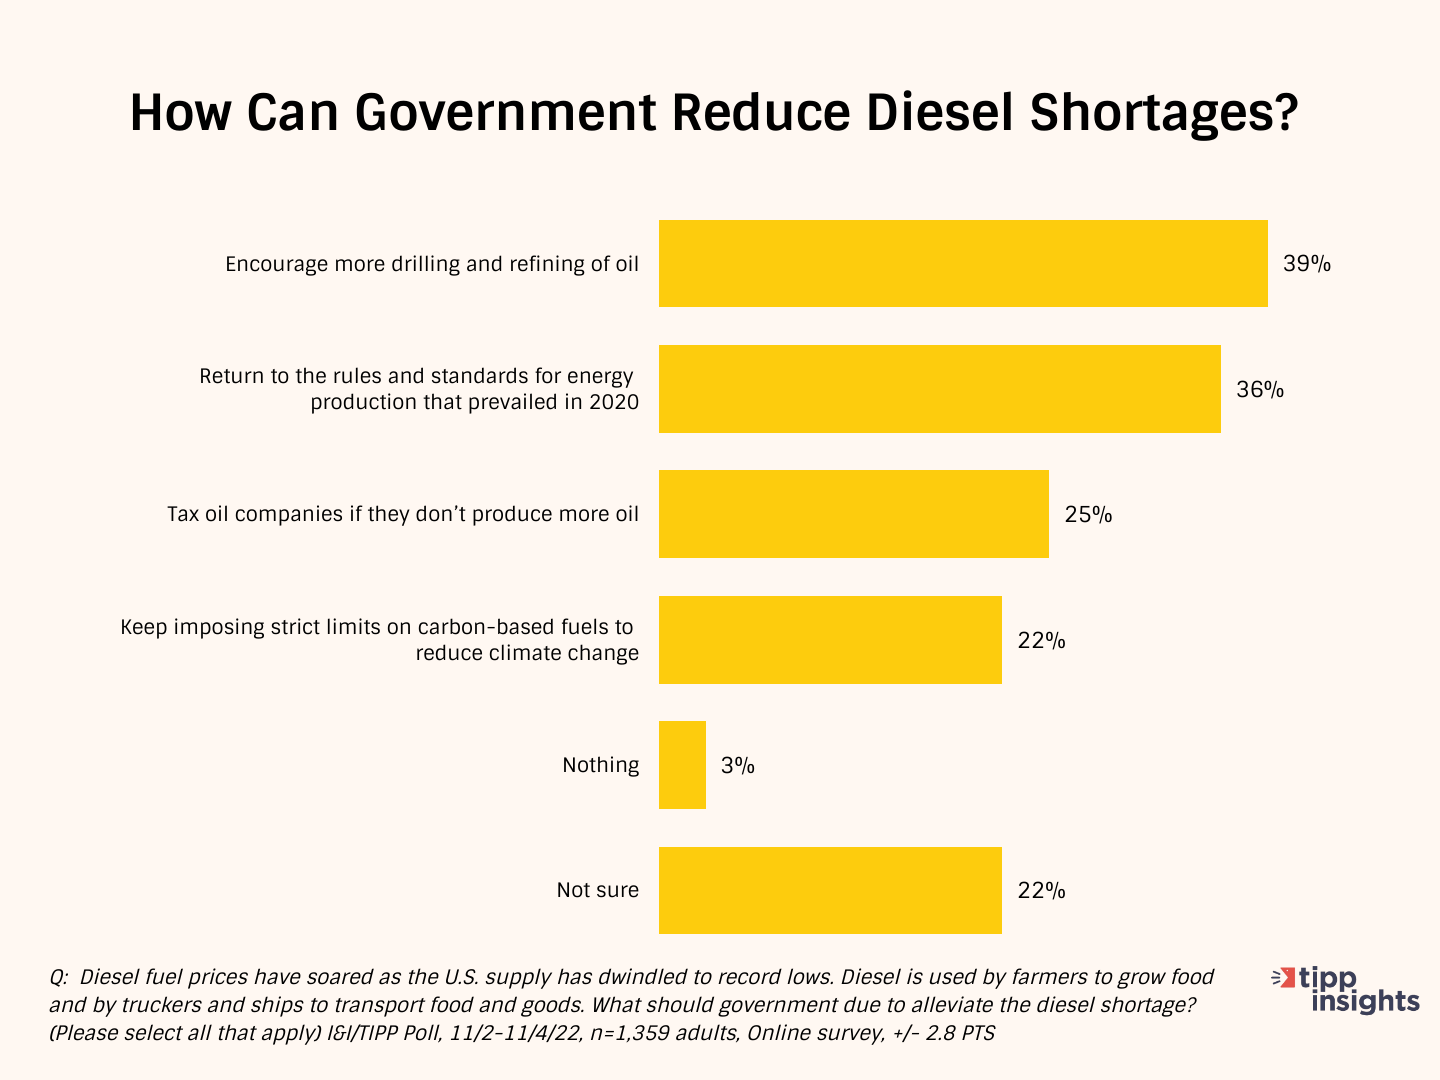 How can government reduce diesel shortages?